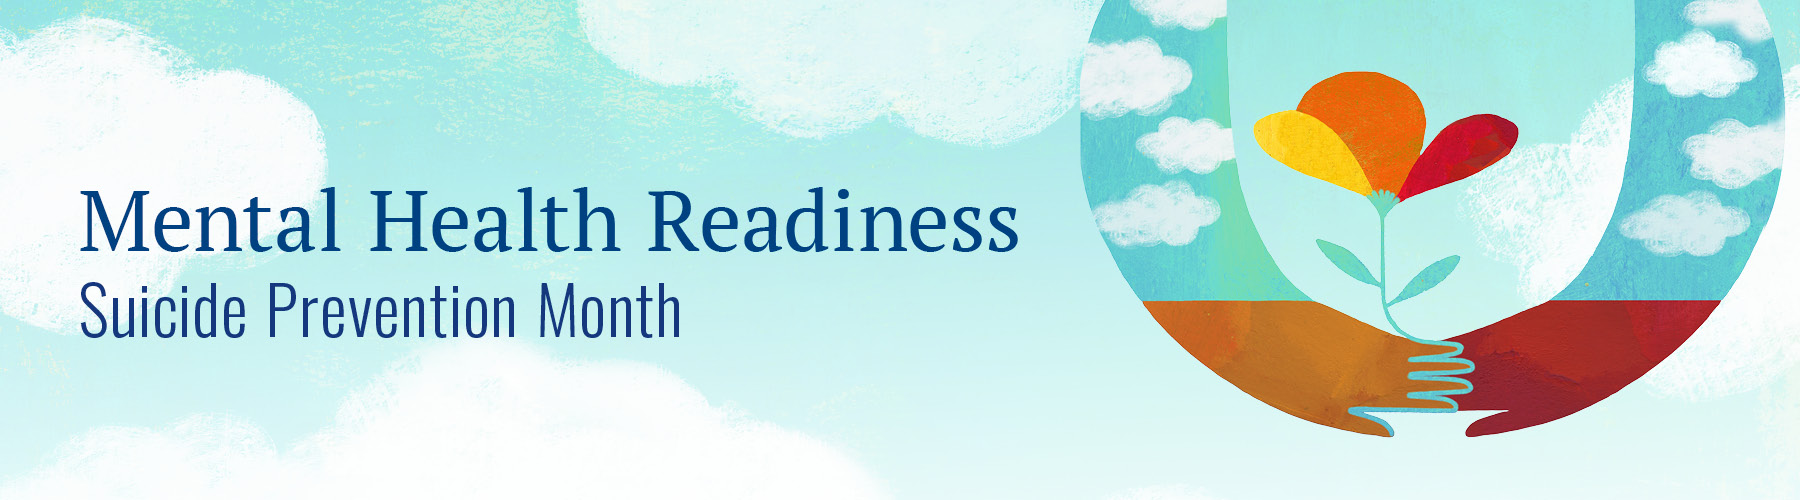 Mental Health Readiness Resources